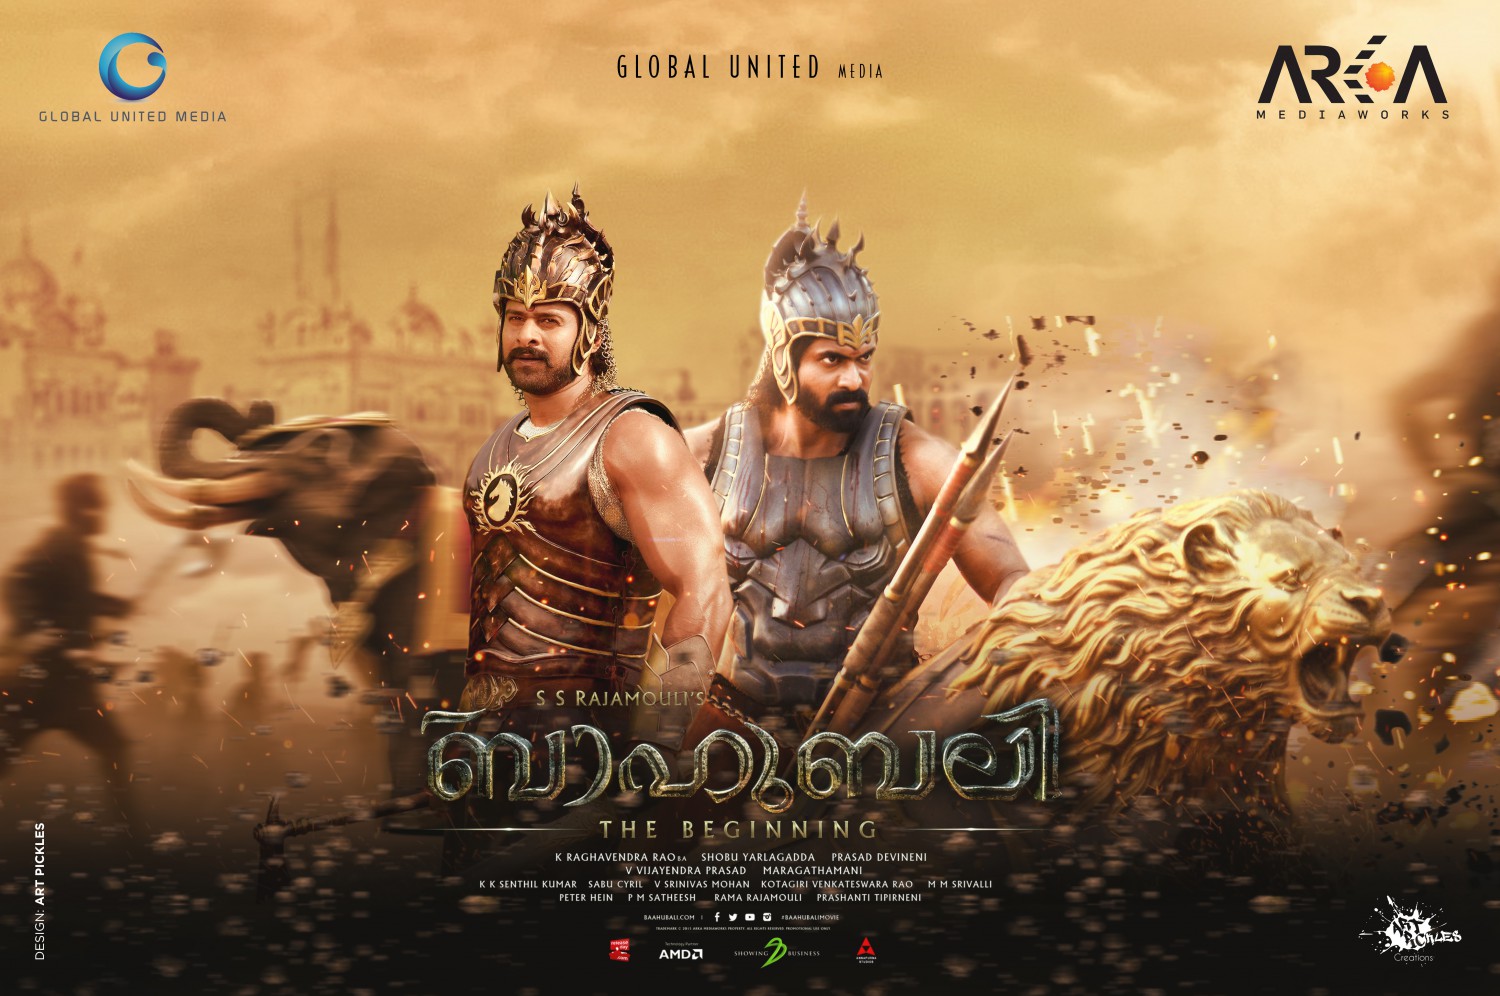 Extra Large Movie Poster Image for Baahubali 